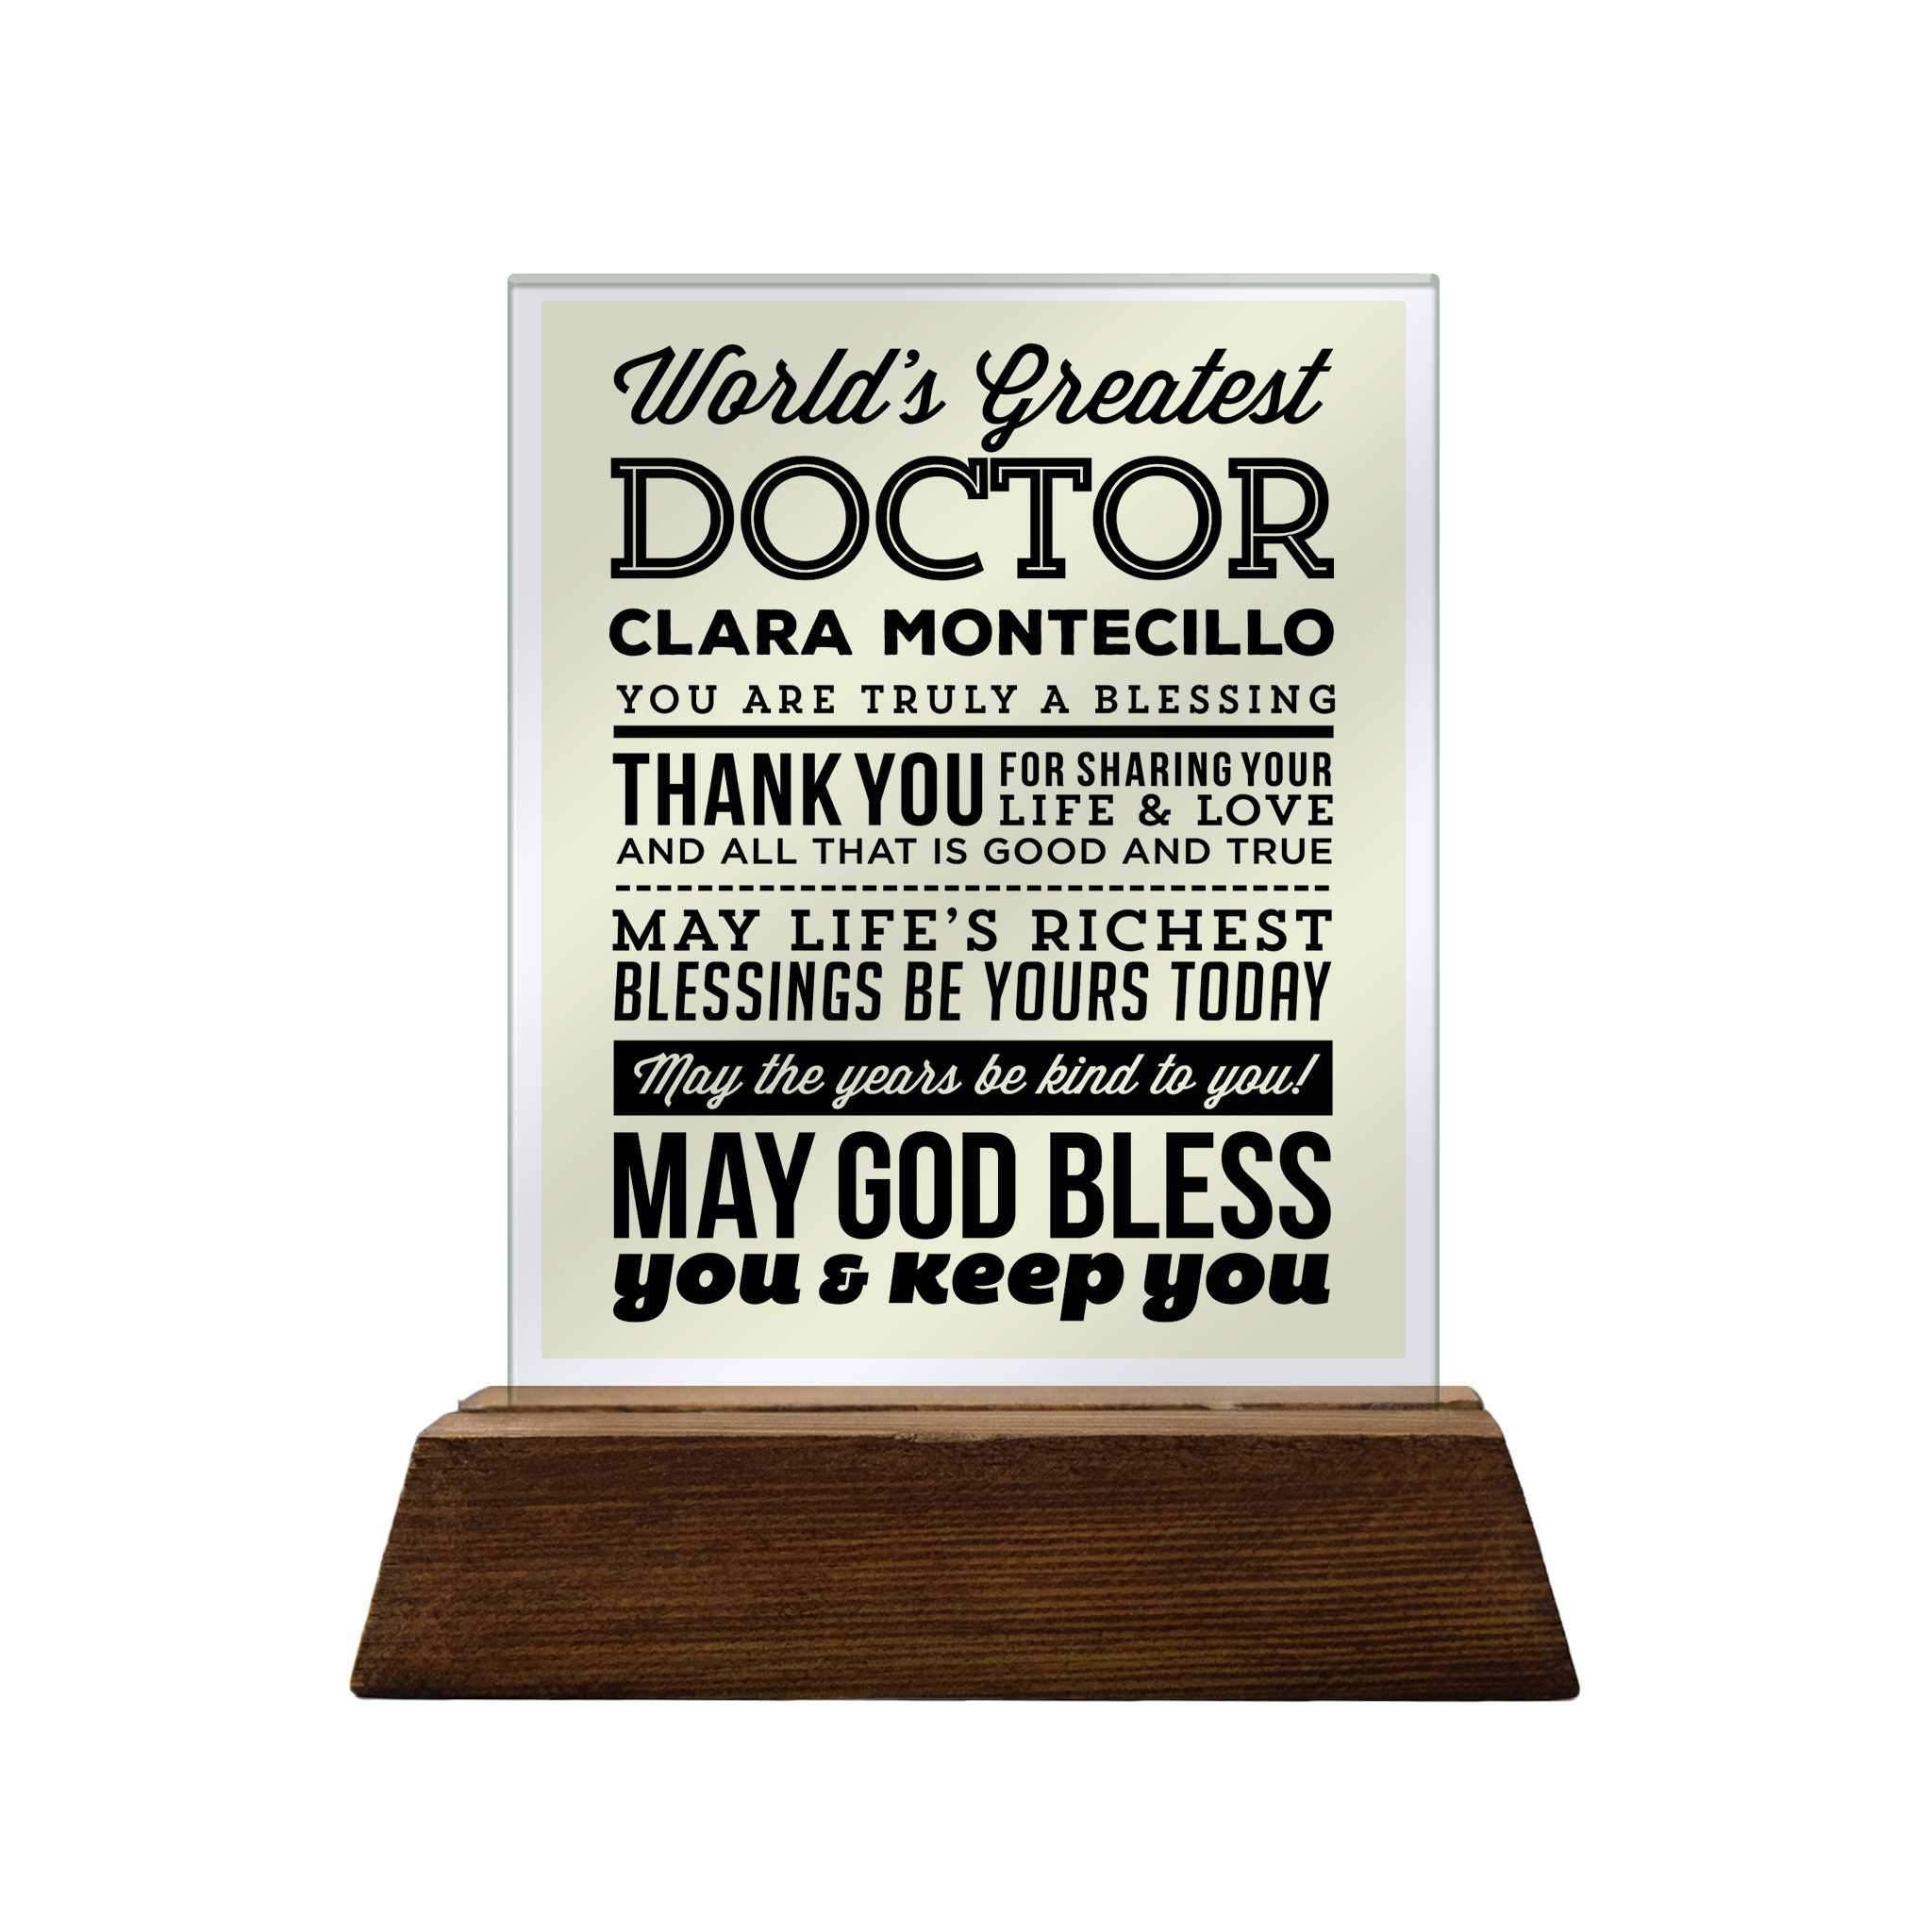 World's Greatest Doctor Glass Plaque